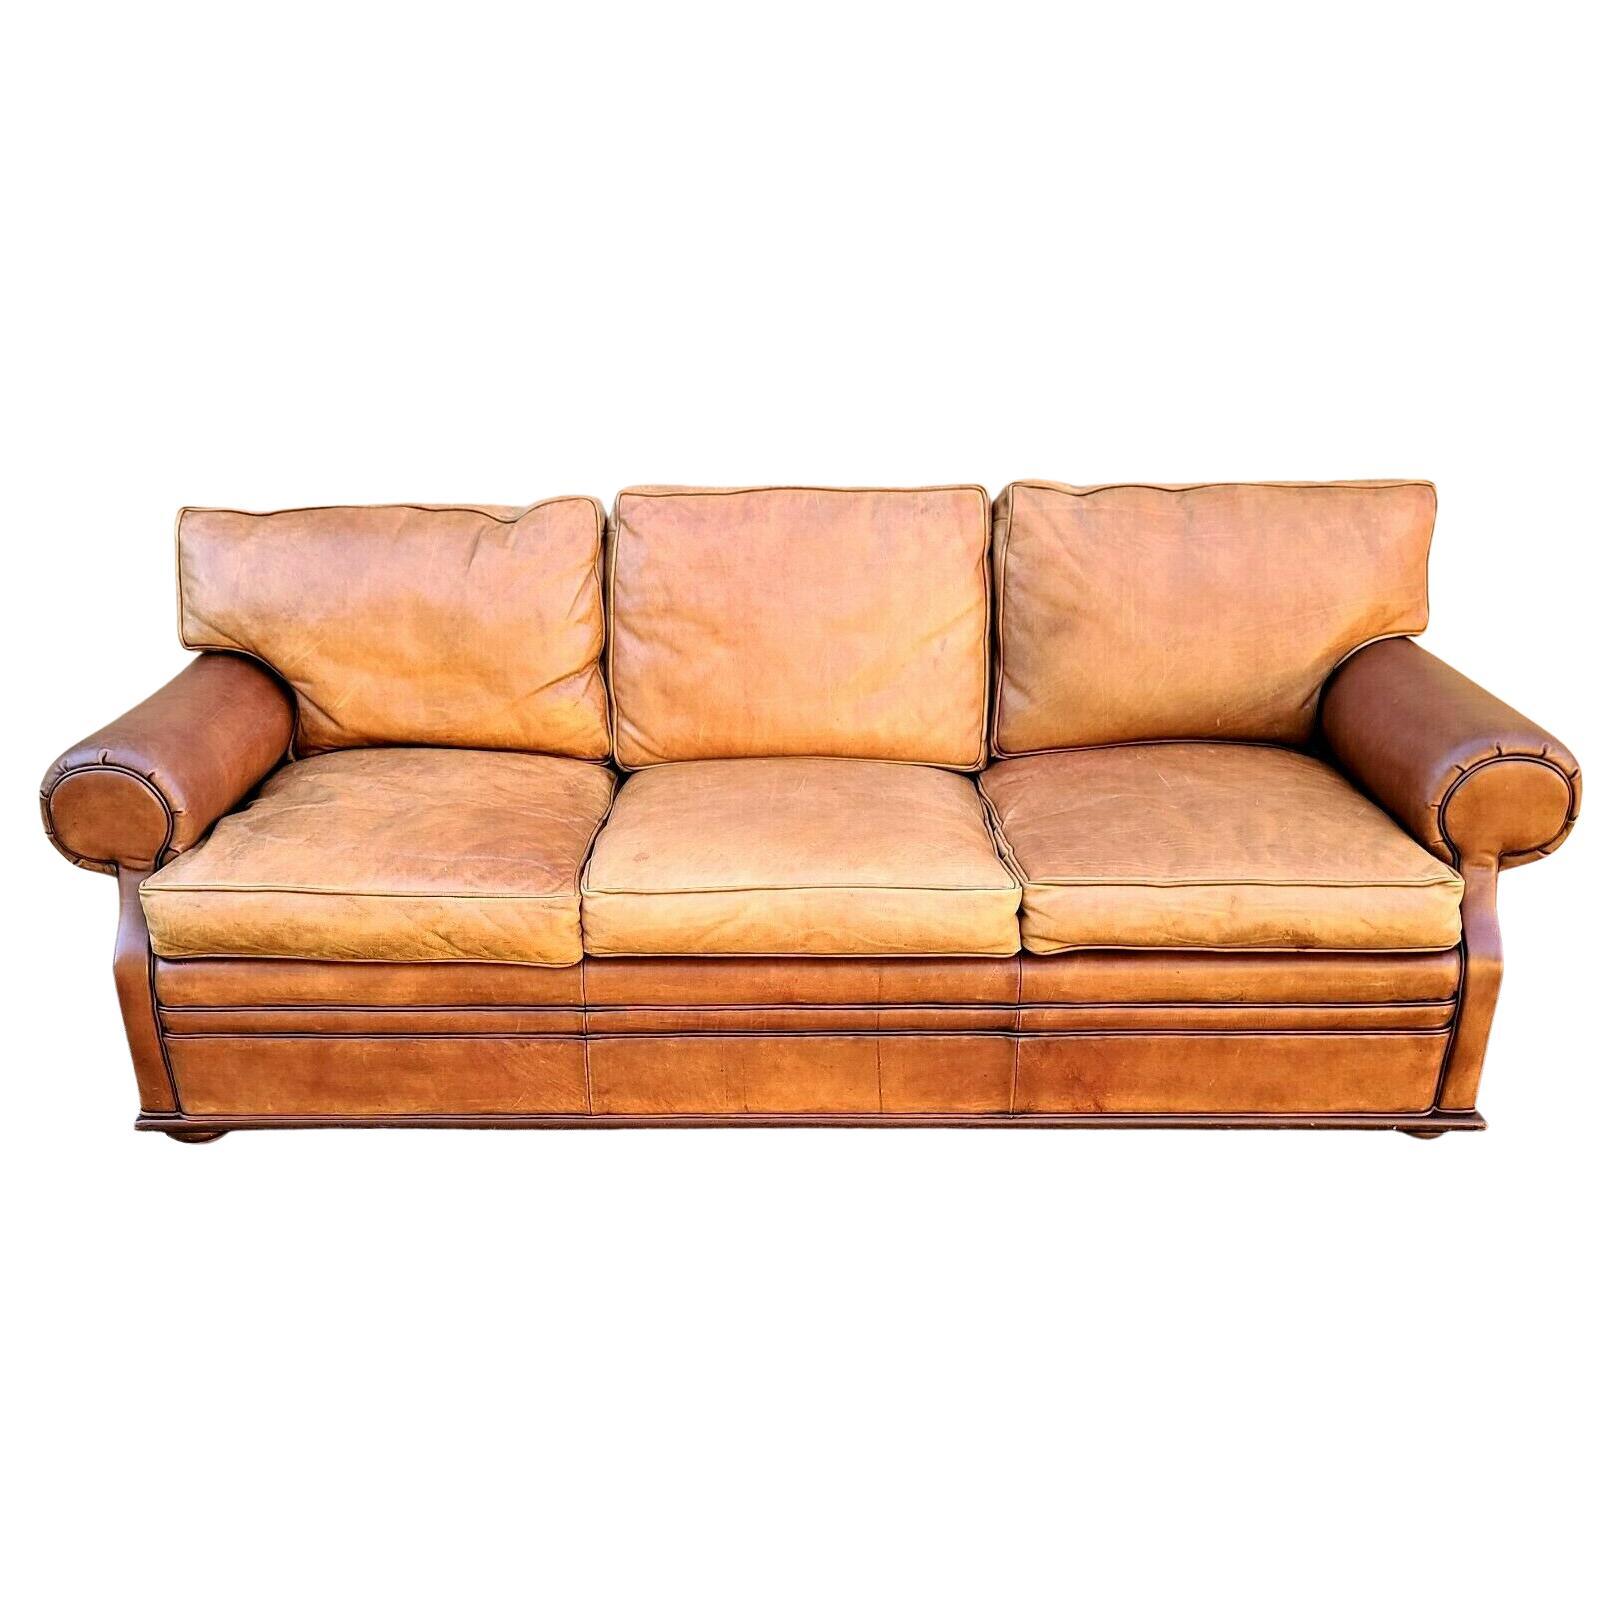 Cassina Court Caramel Brown Leather Sofa - Rooms To Go